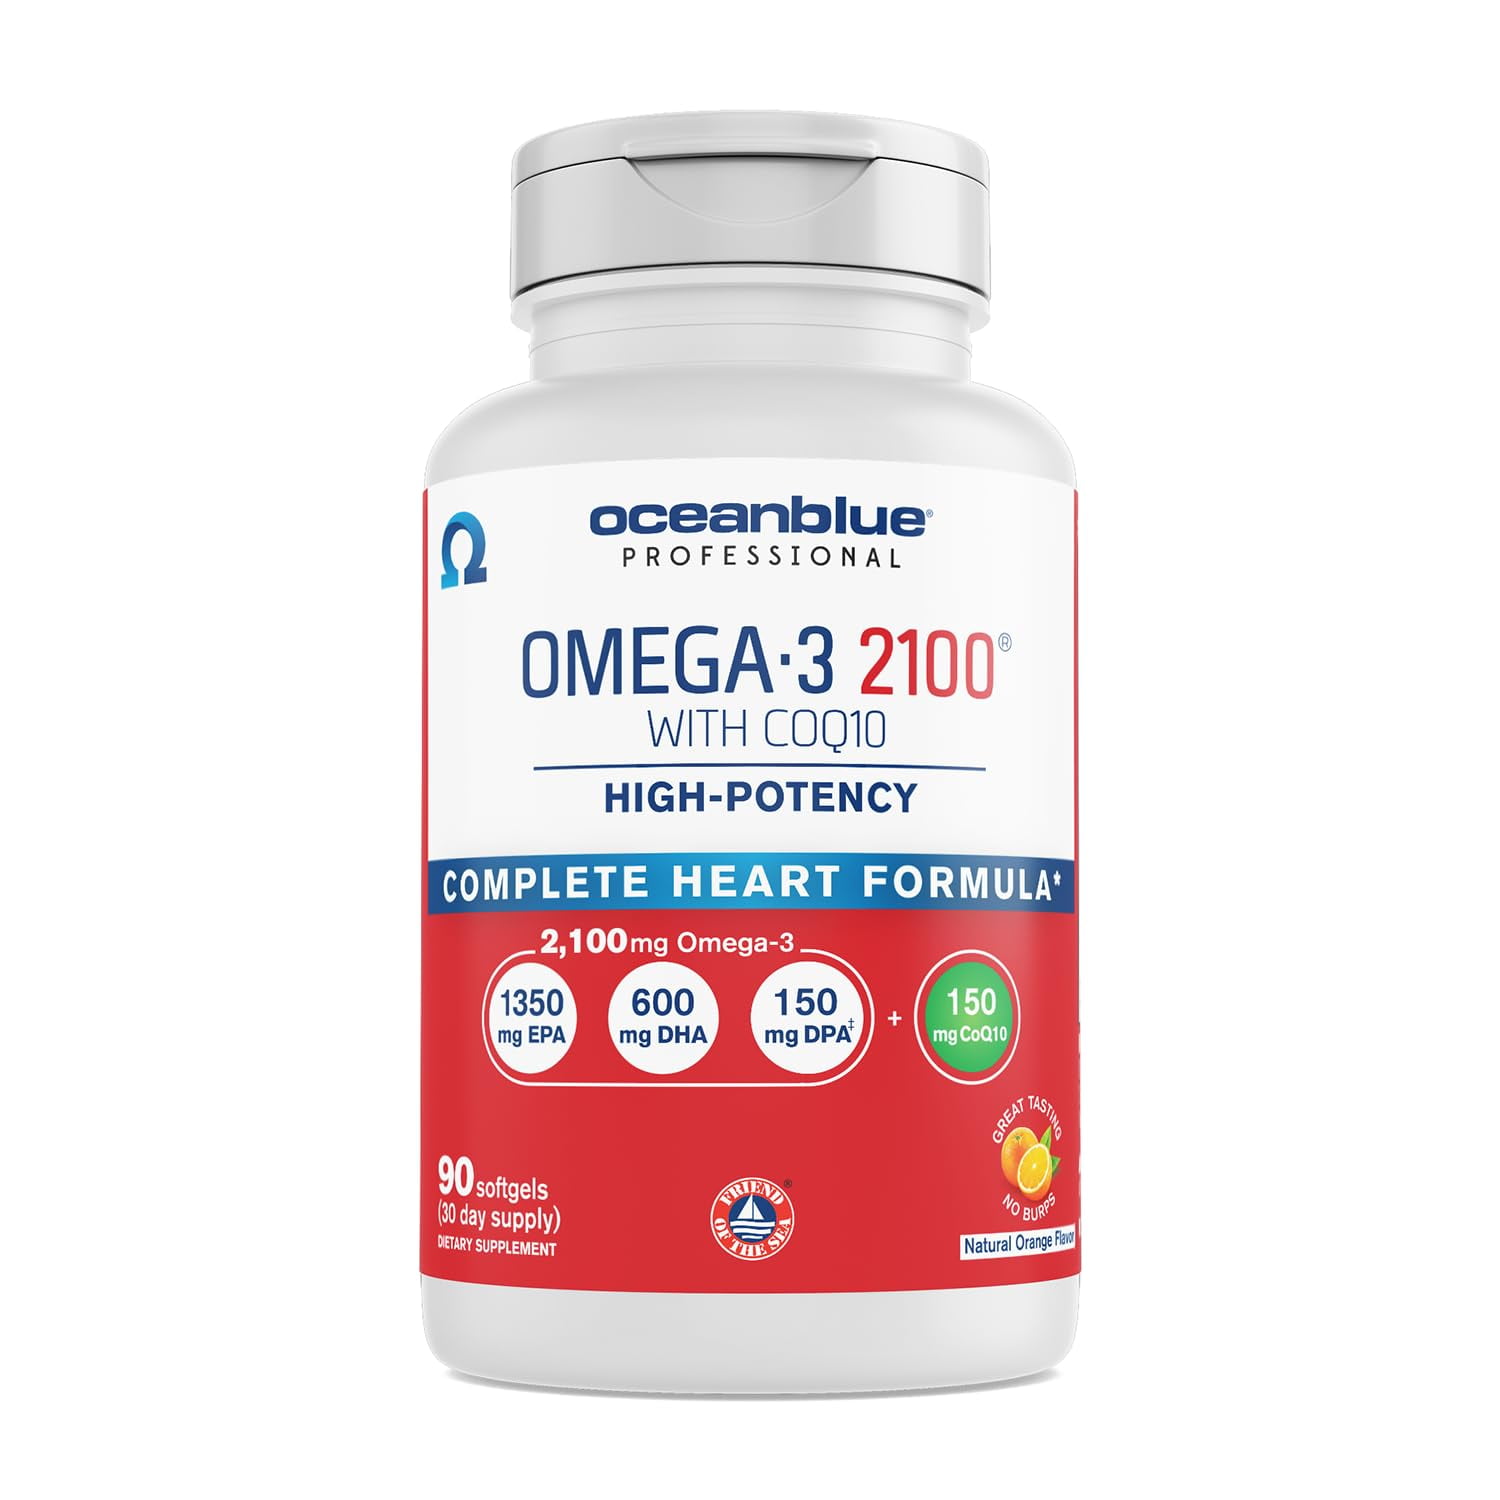 Oceanblue Professional Omega-3 2100 with CoQ10 90 ct (30 Servings